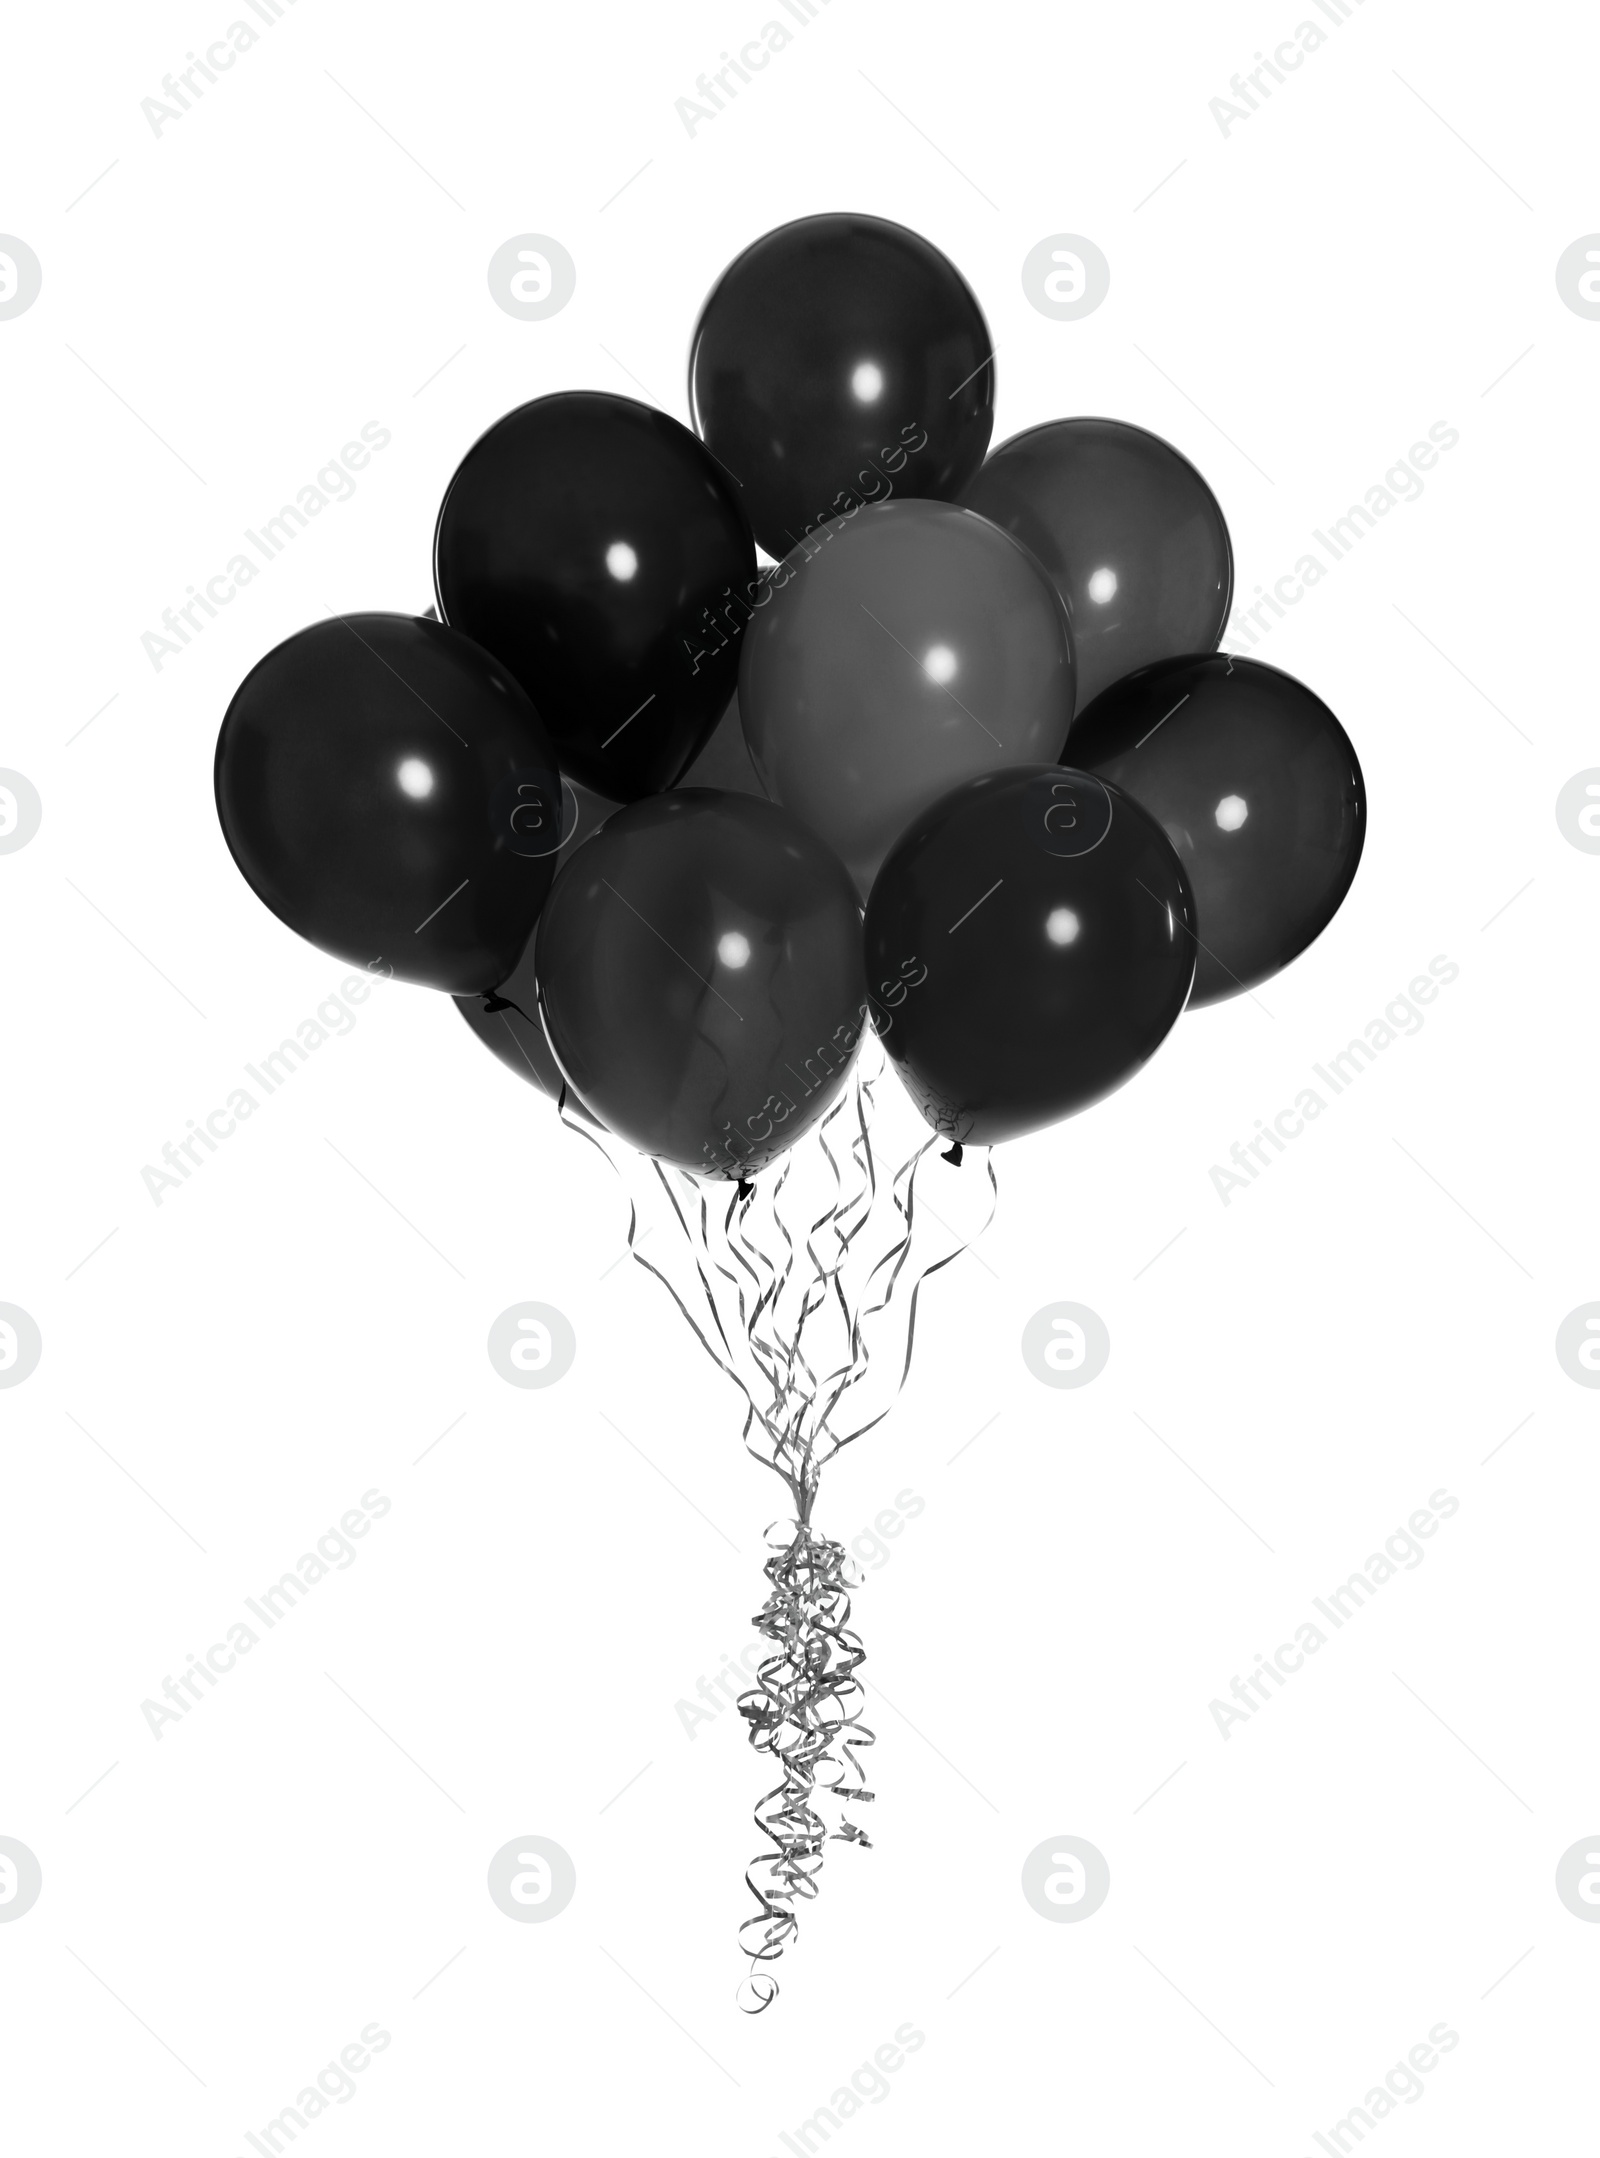 Image of Black Friday concept. Bunch of balloons on white background